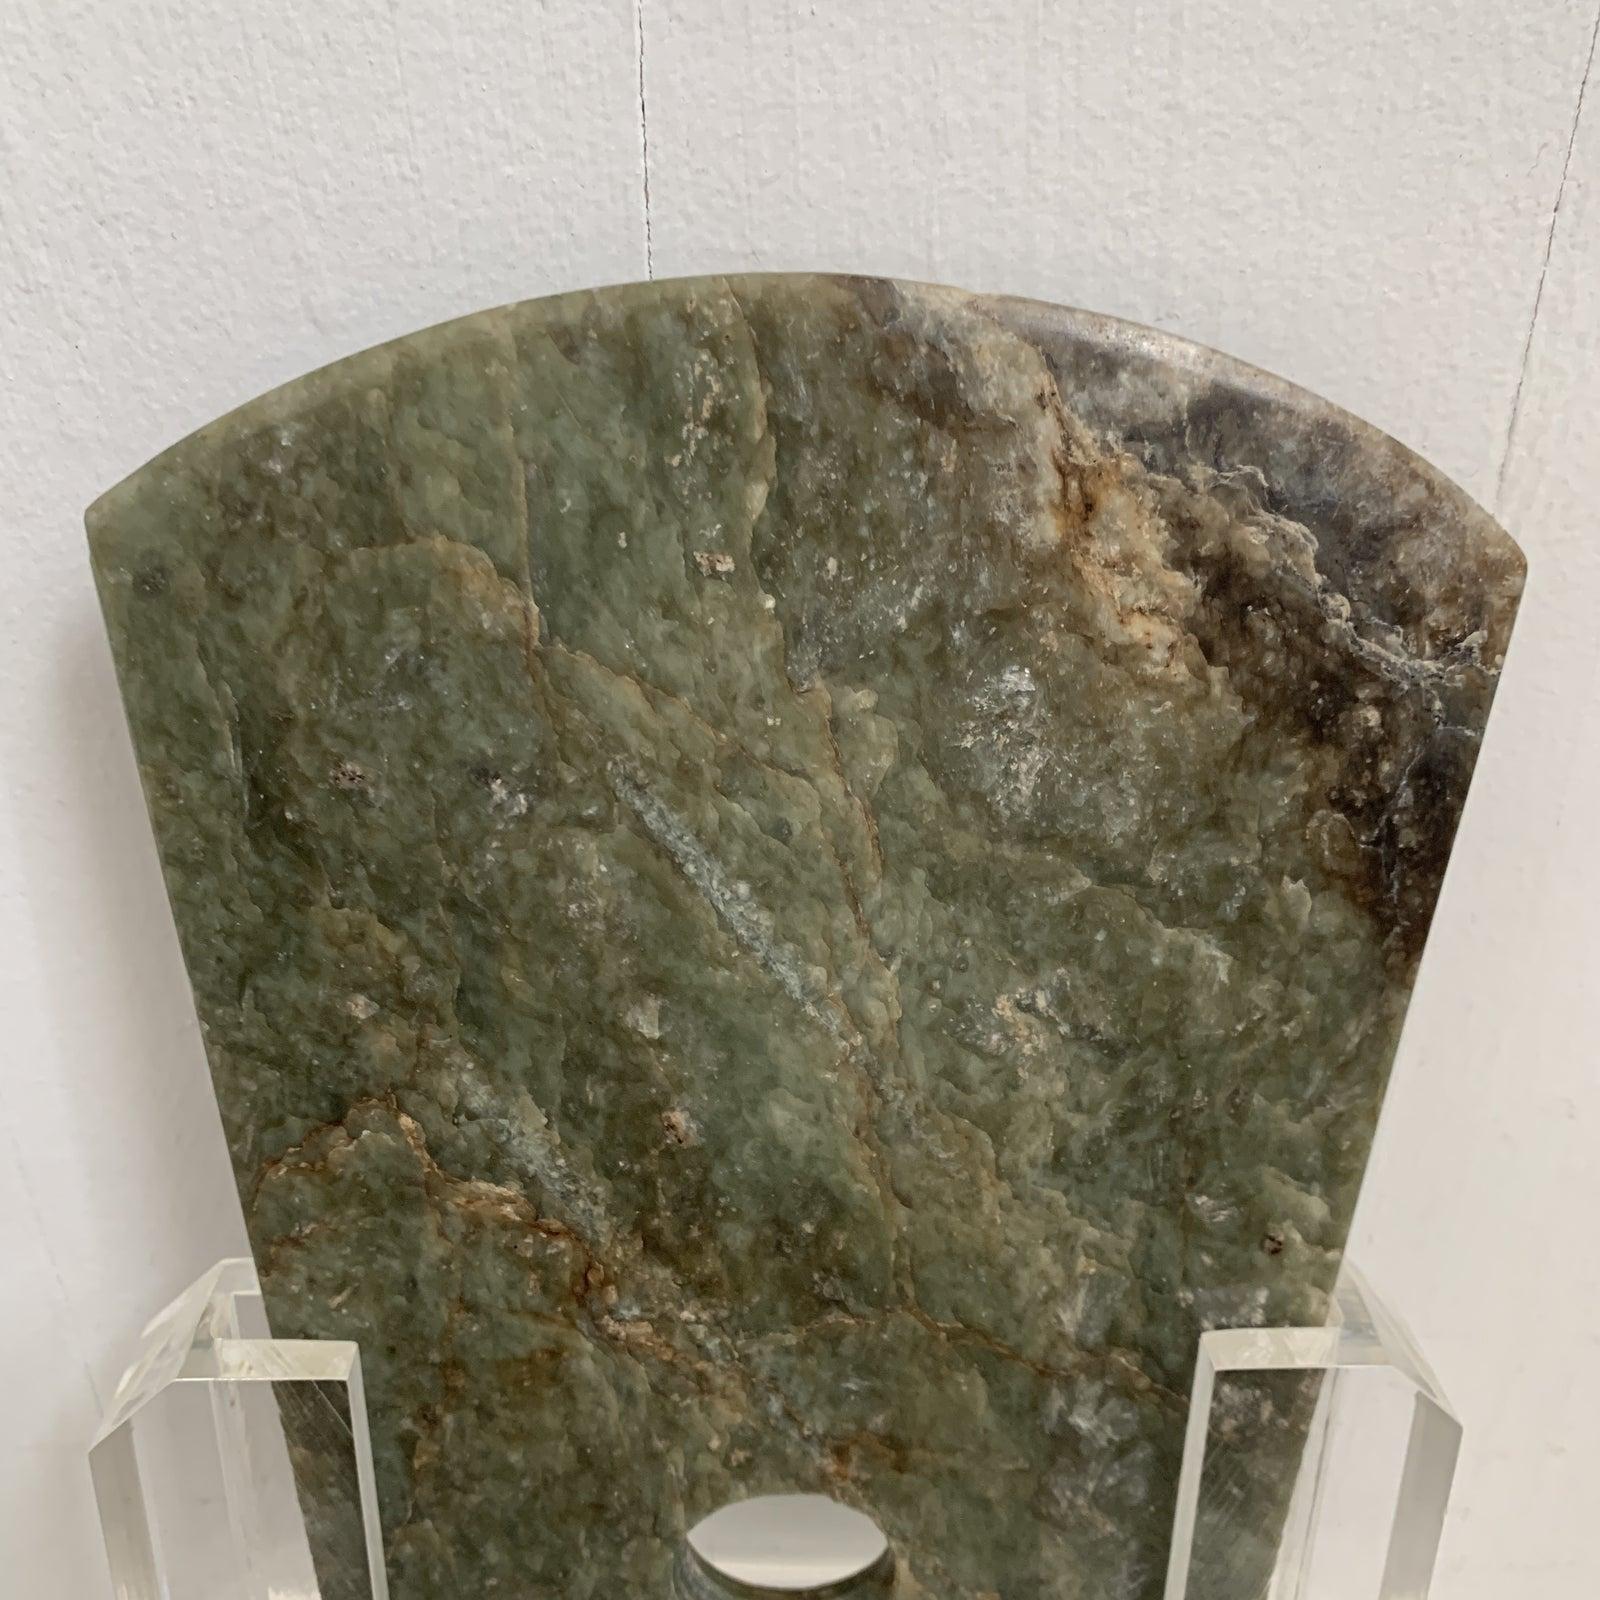  Stone  Ax

Green/Brown Stone with thick custom lucite stand. This peice is being sold on consignment at our gallery. It is really beatiful in person and has no flaws. We cannot confirm the true history with this particular peice. While stunning and